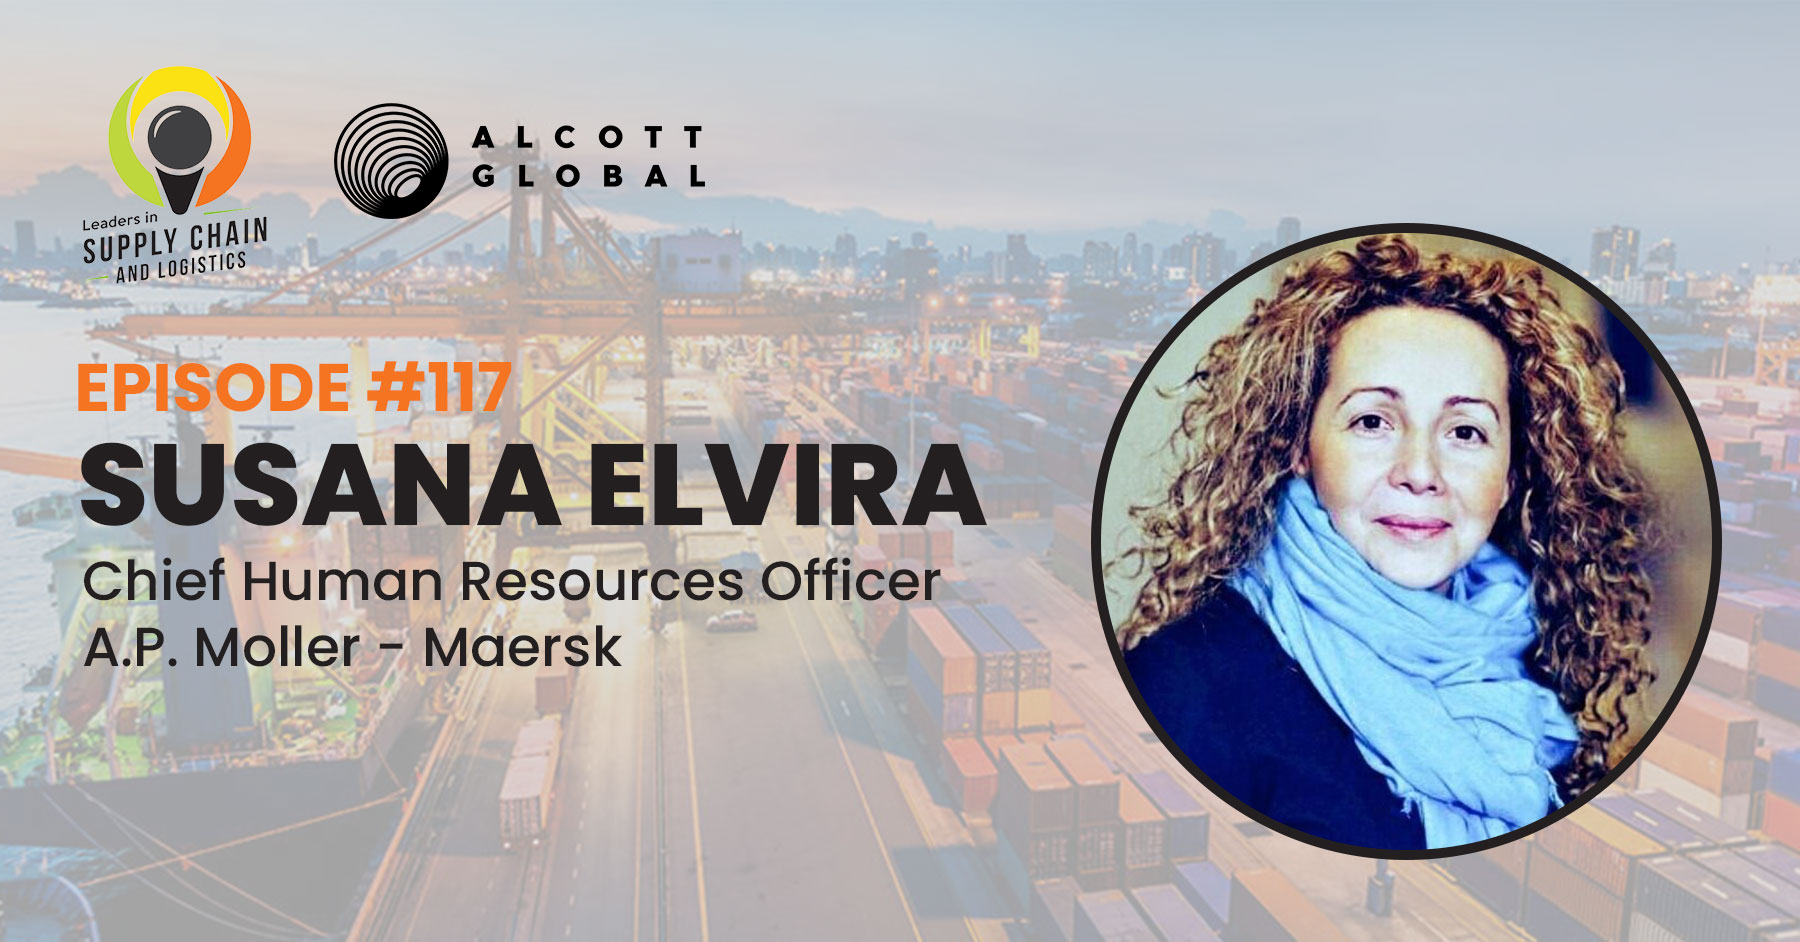 #117: Susana Elvira, Chief Human Resources Officer of A.P. Moller - Maersk Featured Image